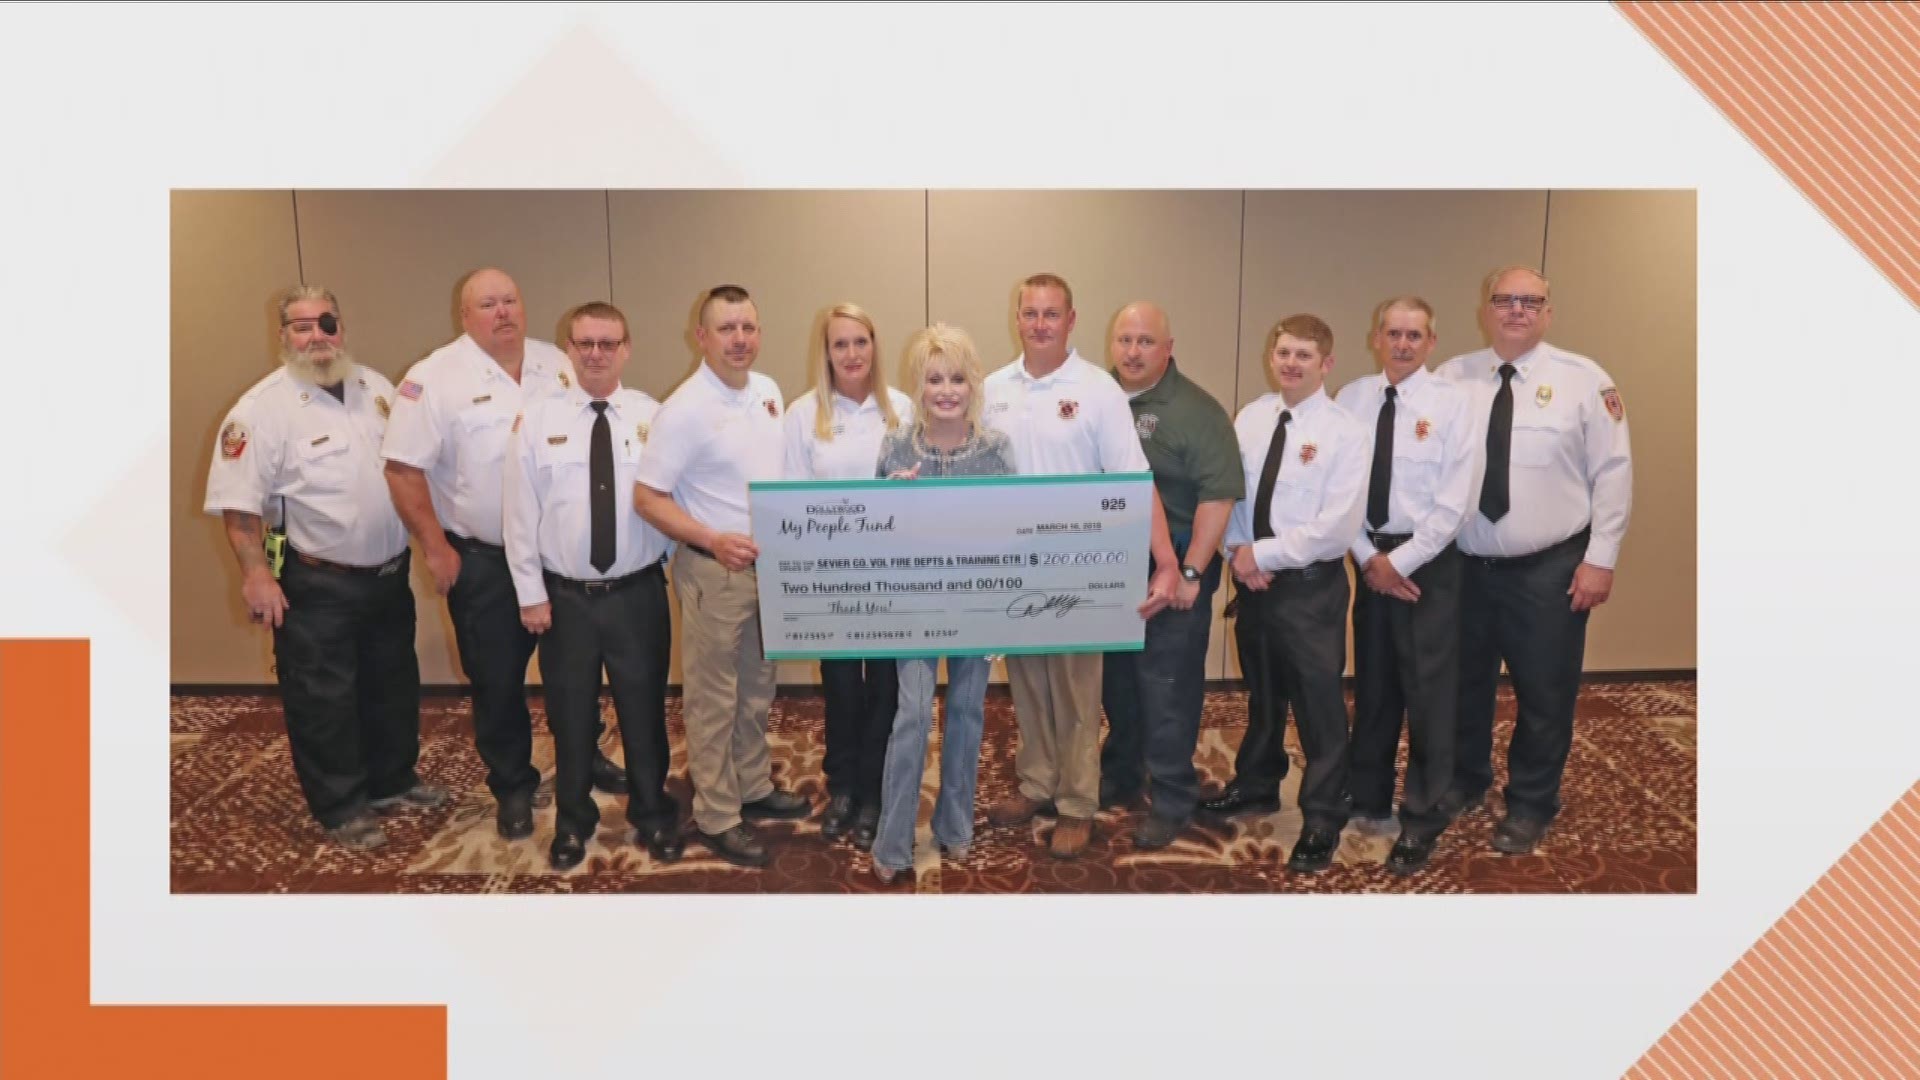 Dolly Parton Met with all of the chiefs of the departments at Dollywood's DreamMore Resort and Spa to make the $200,000 donation.